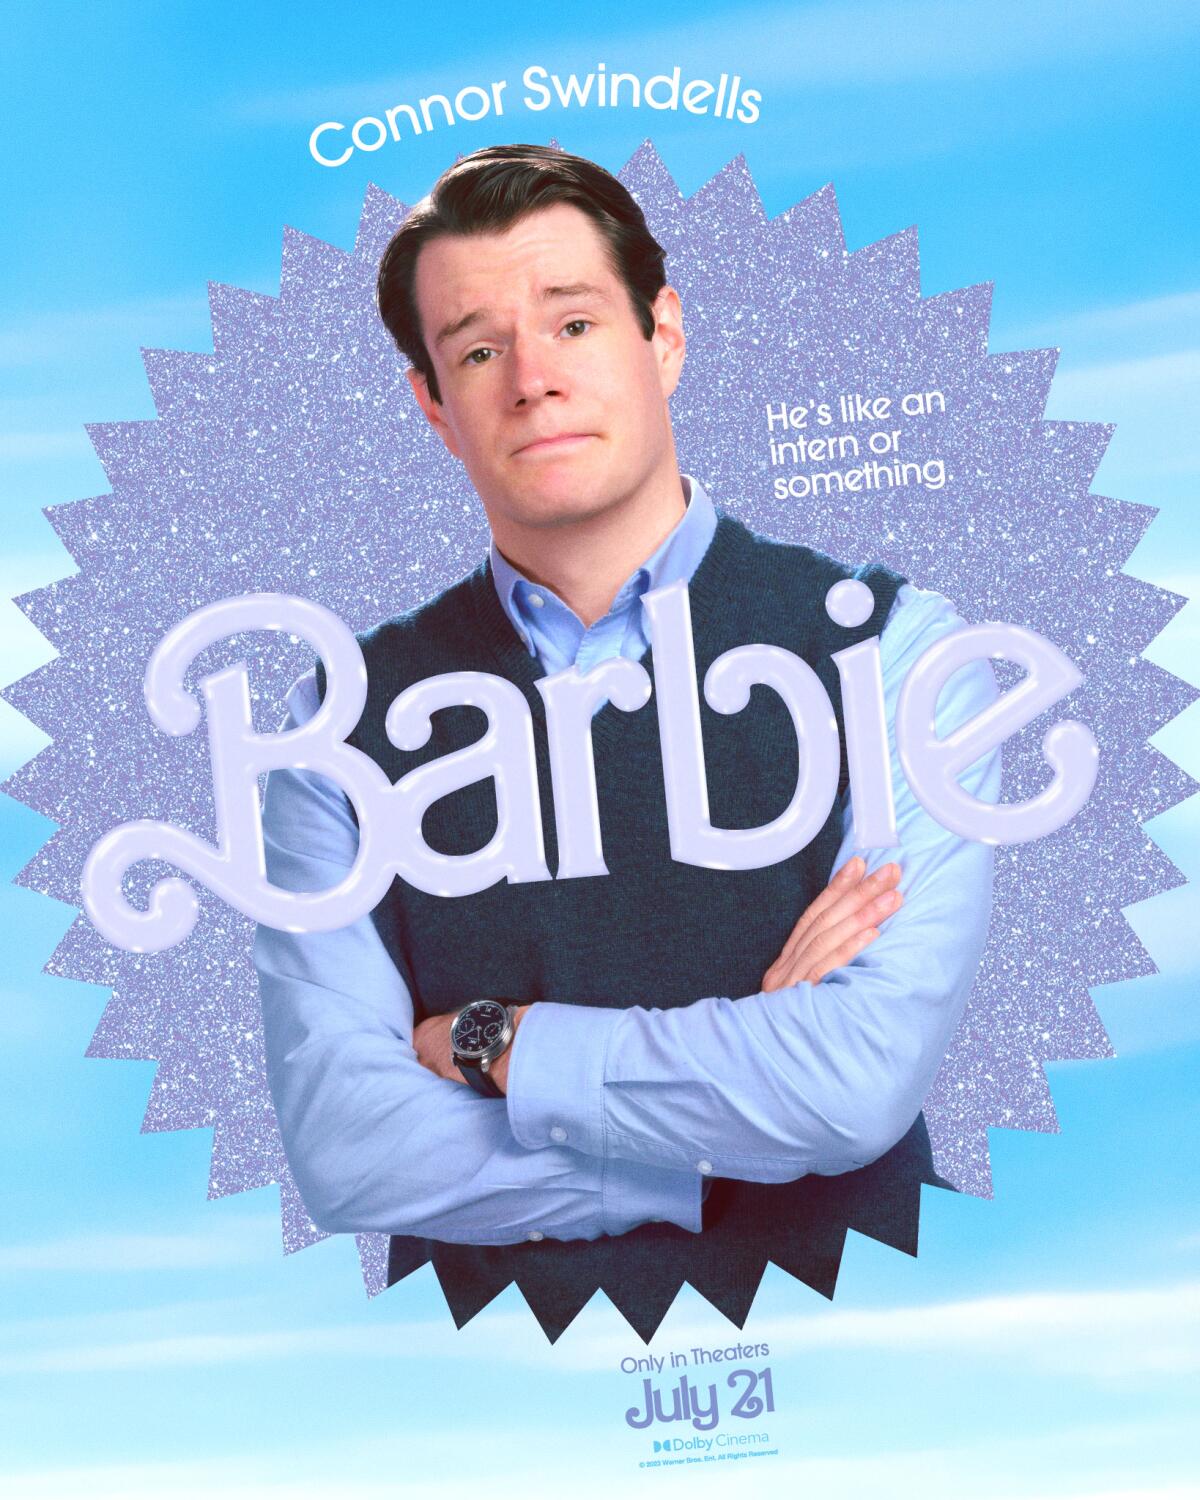 Connor Swindells poses with his arms crossed in a "Barbie" movie poster. He wears a blue shirt and sweater vest